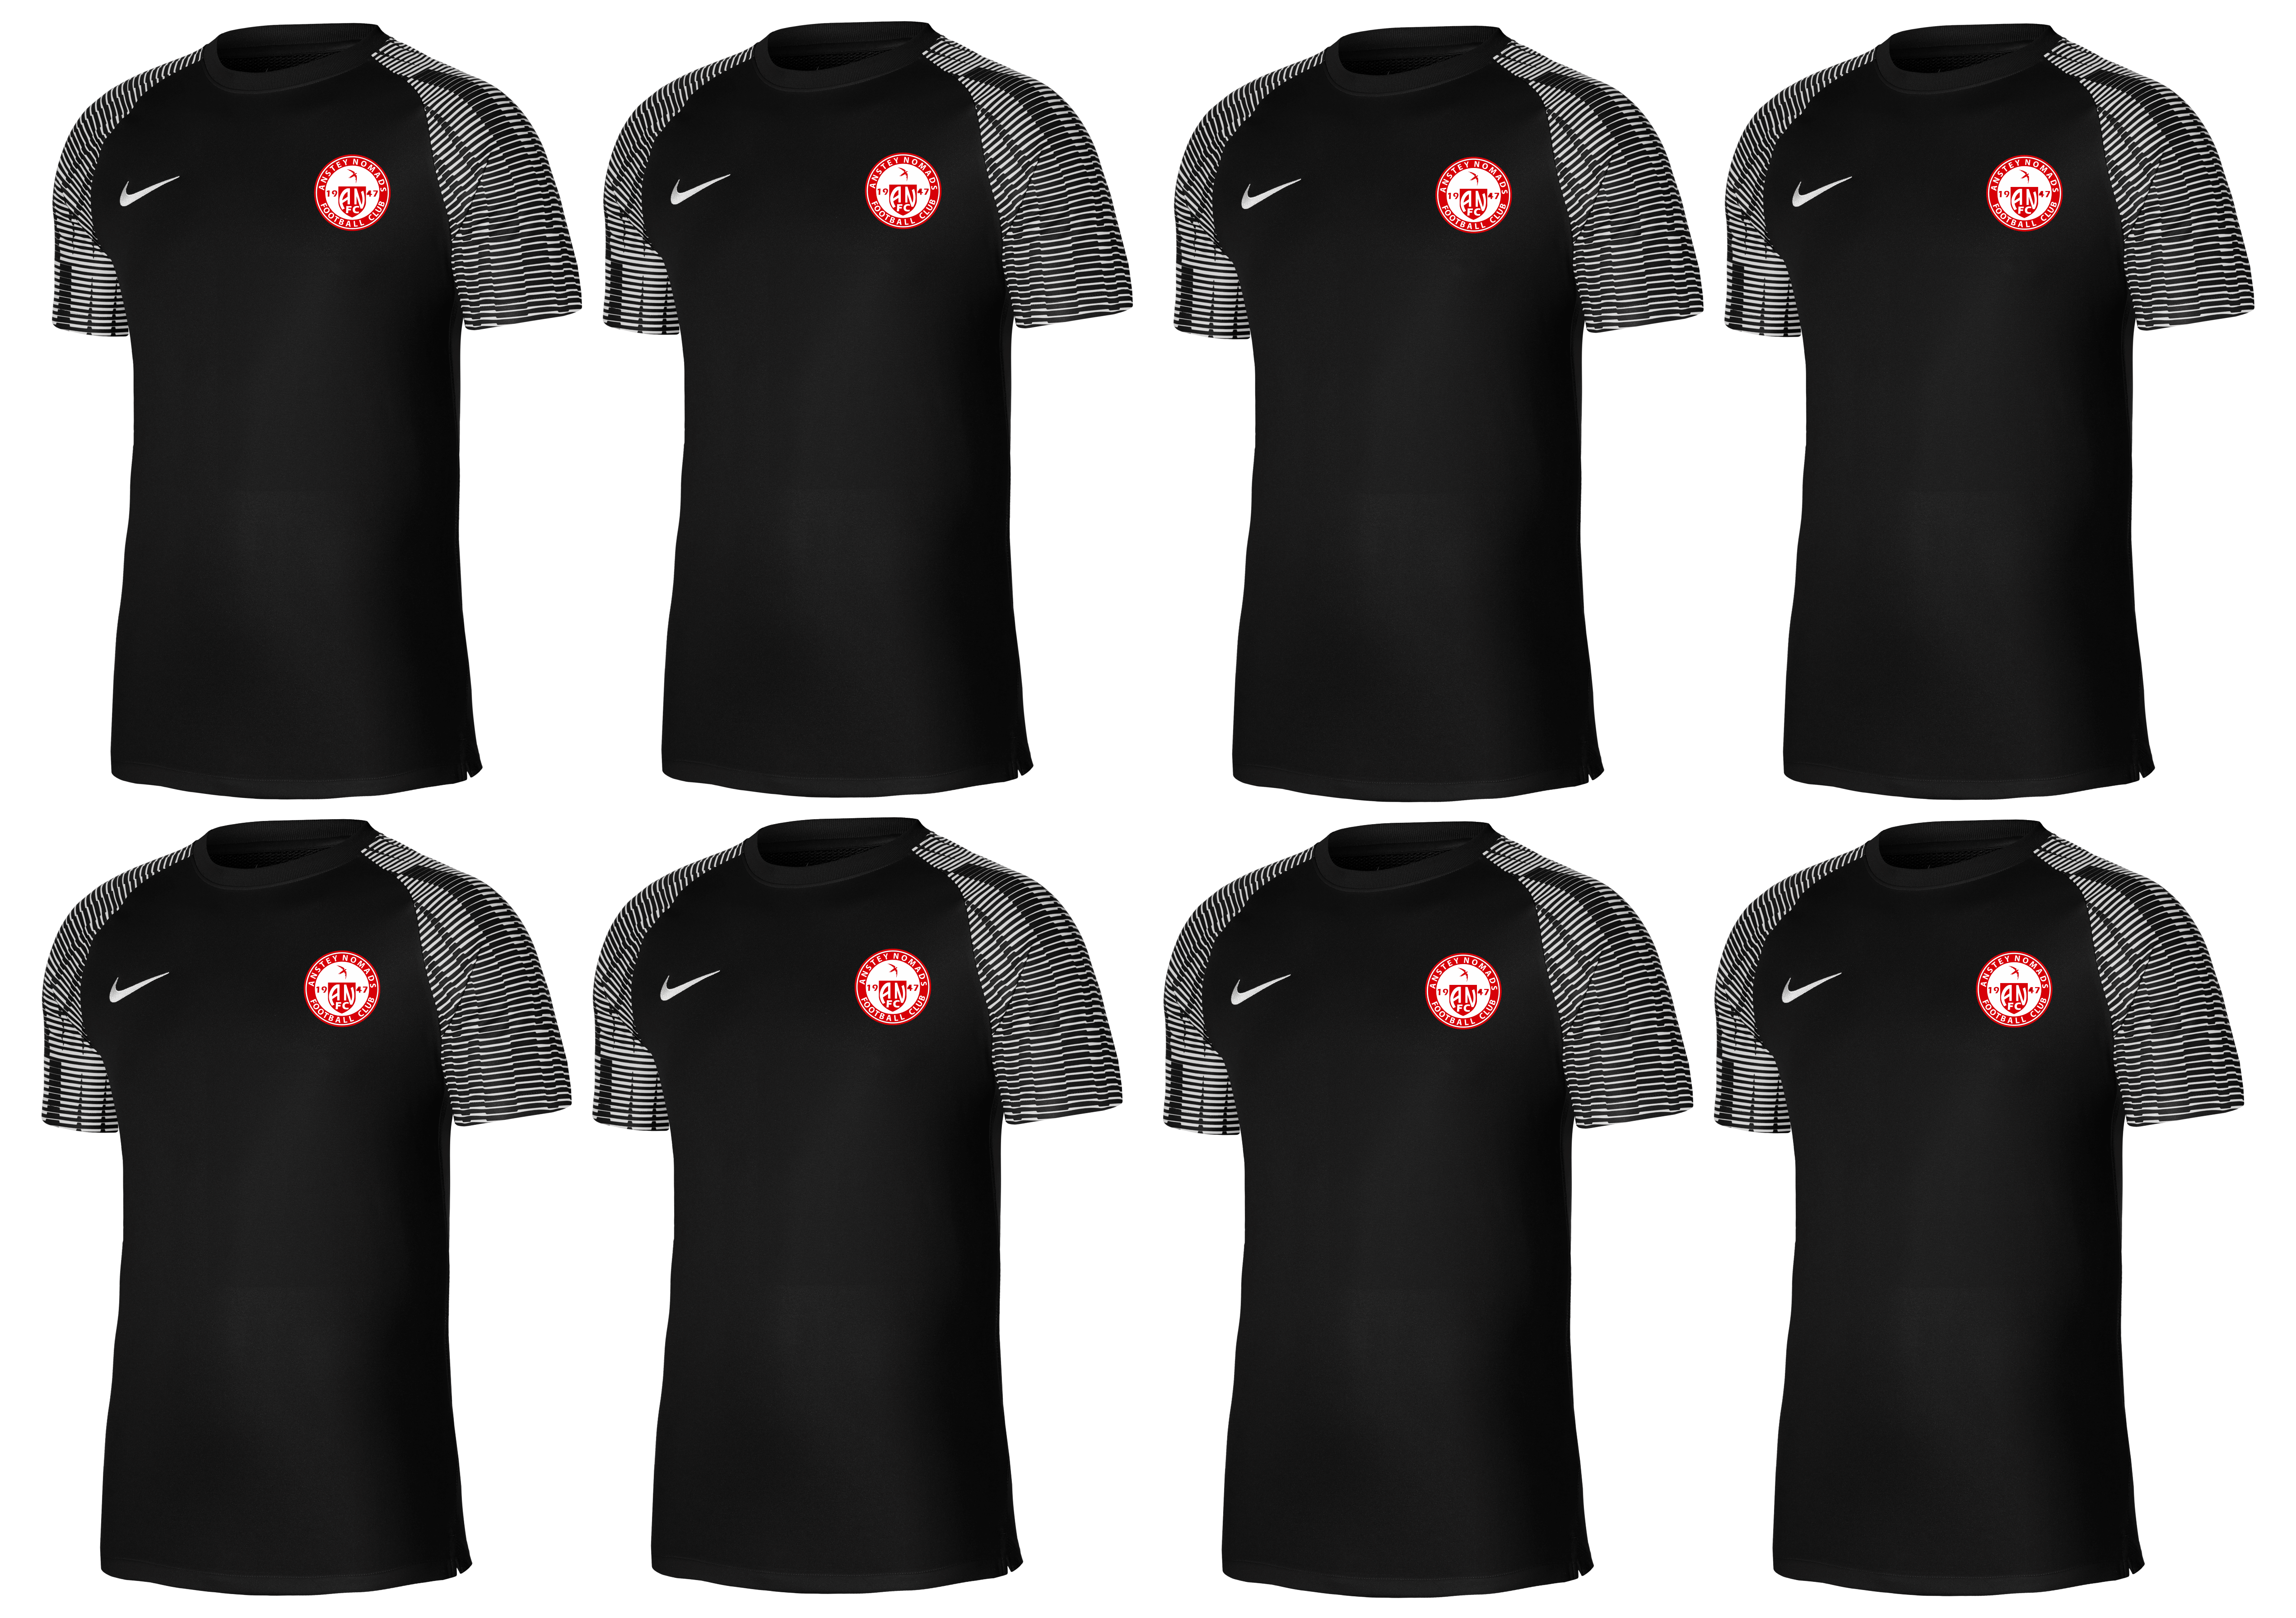 Anstey Nomads - Youth Training Top Bundle 1 (8 Tops)